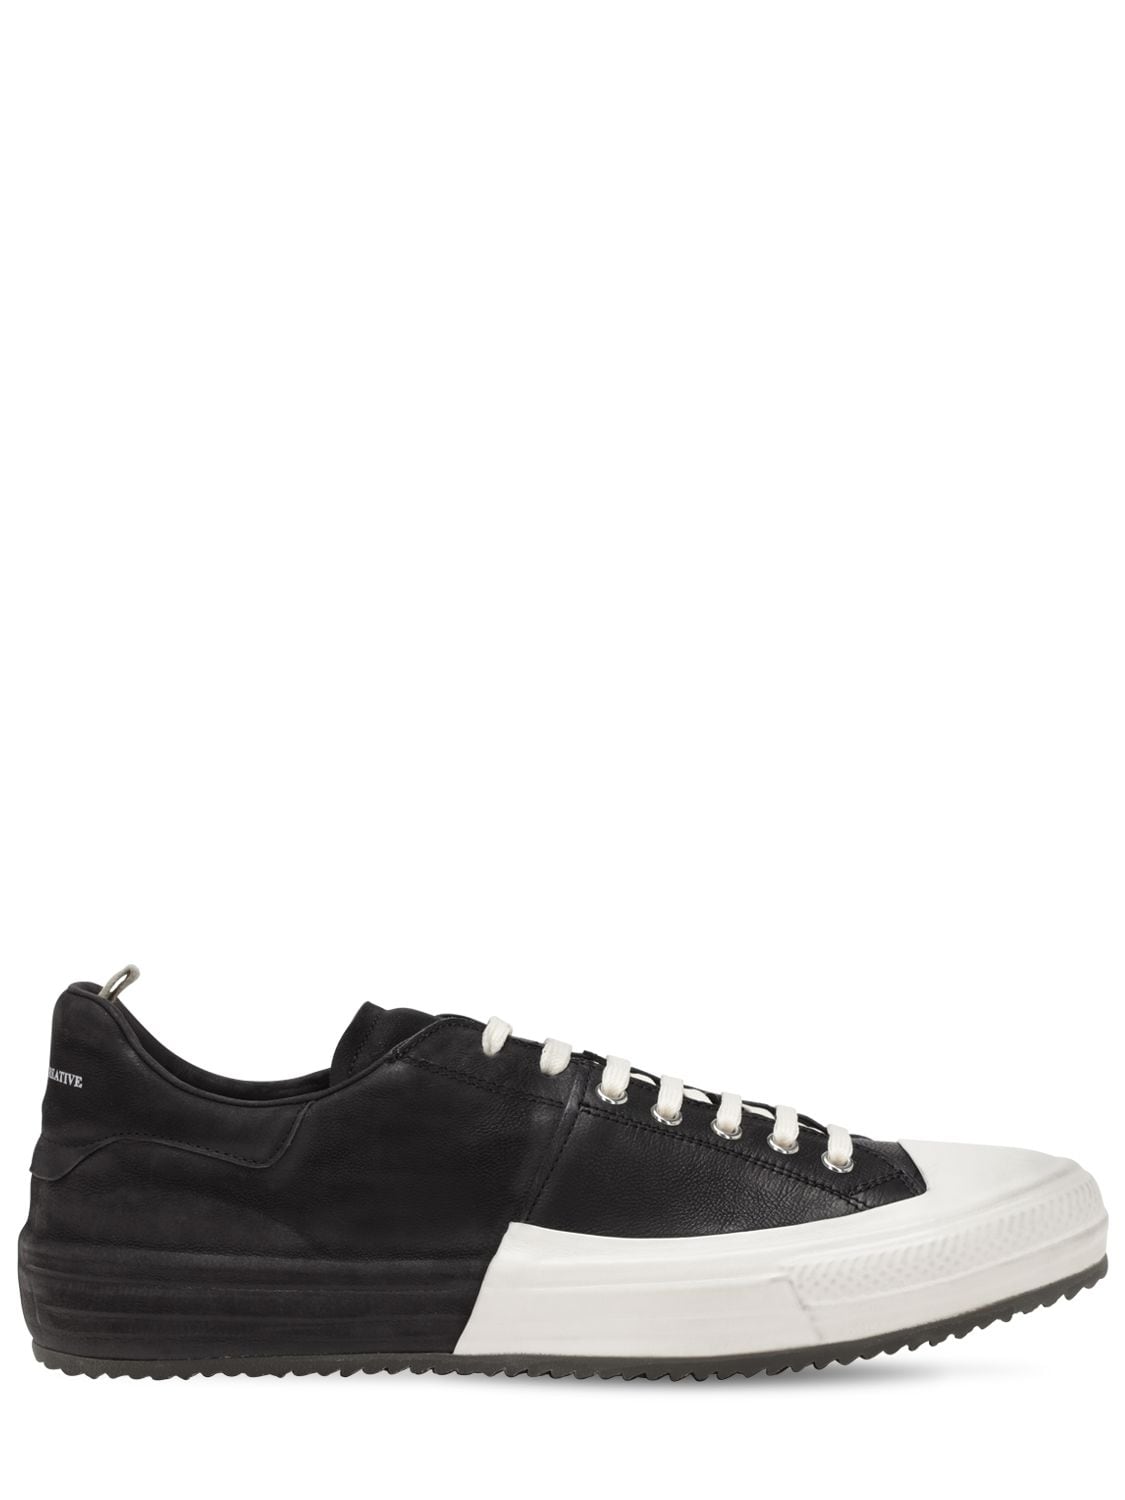 OFFICINE CREATIVE LOW-TOP LEATHER SNEAKERS,72ID0A004-QZAWOQ2